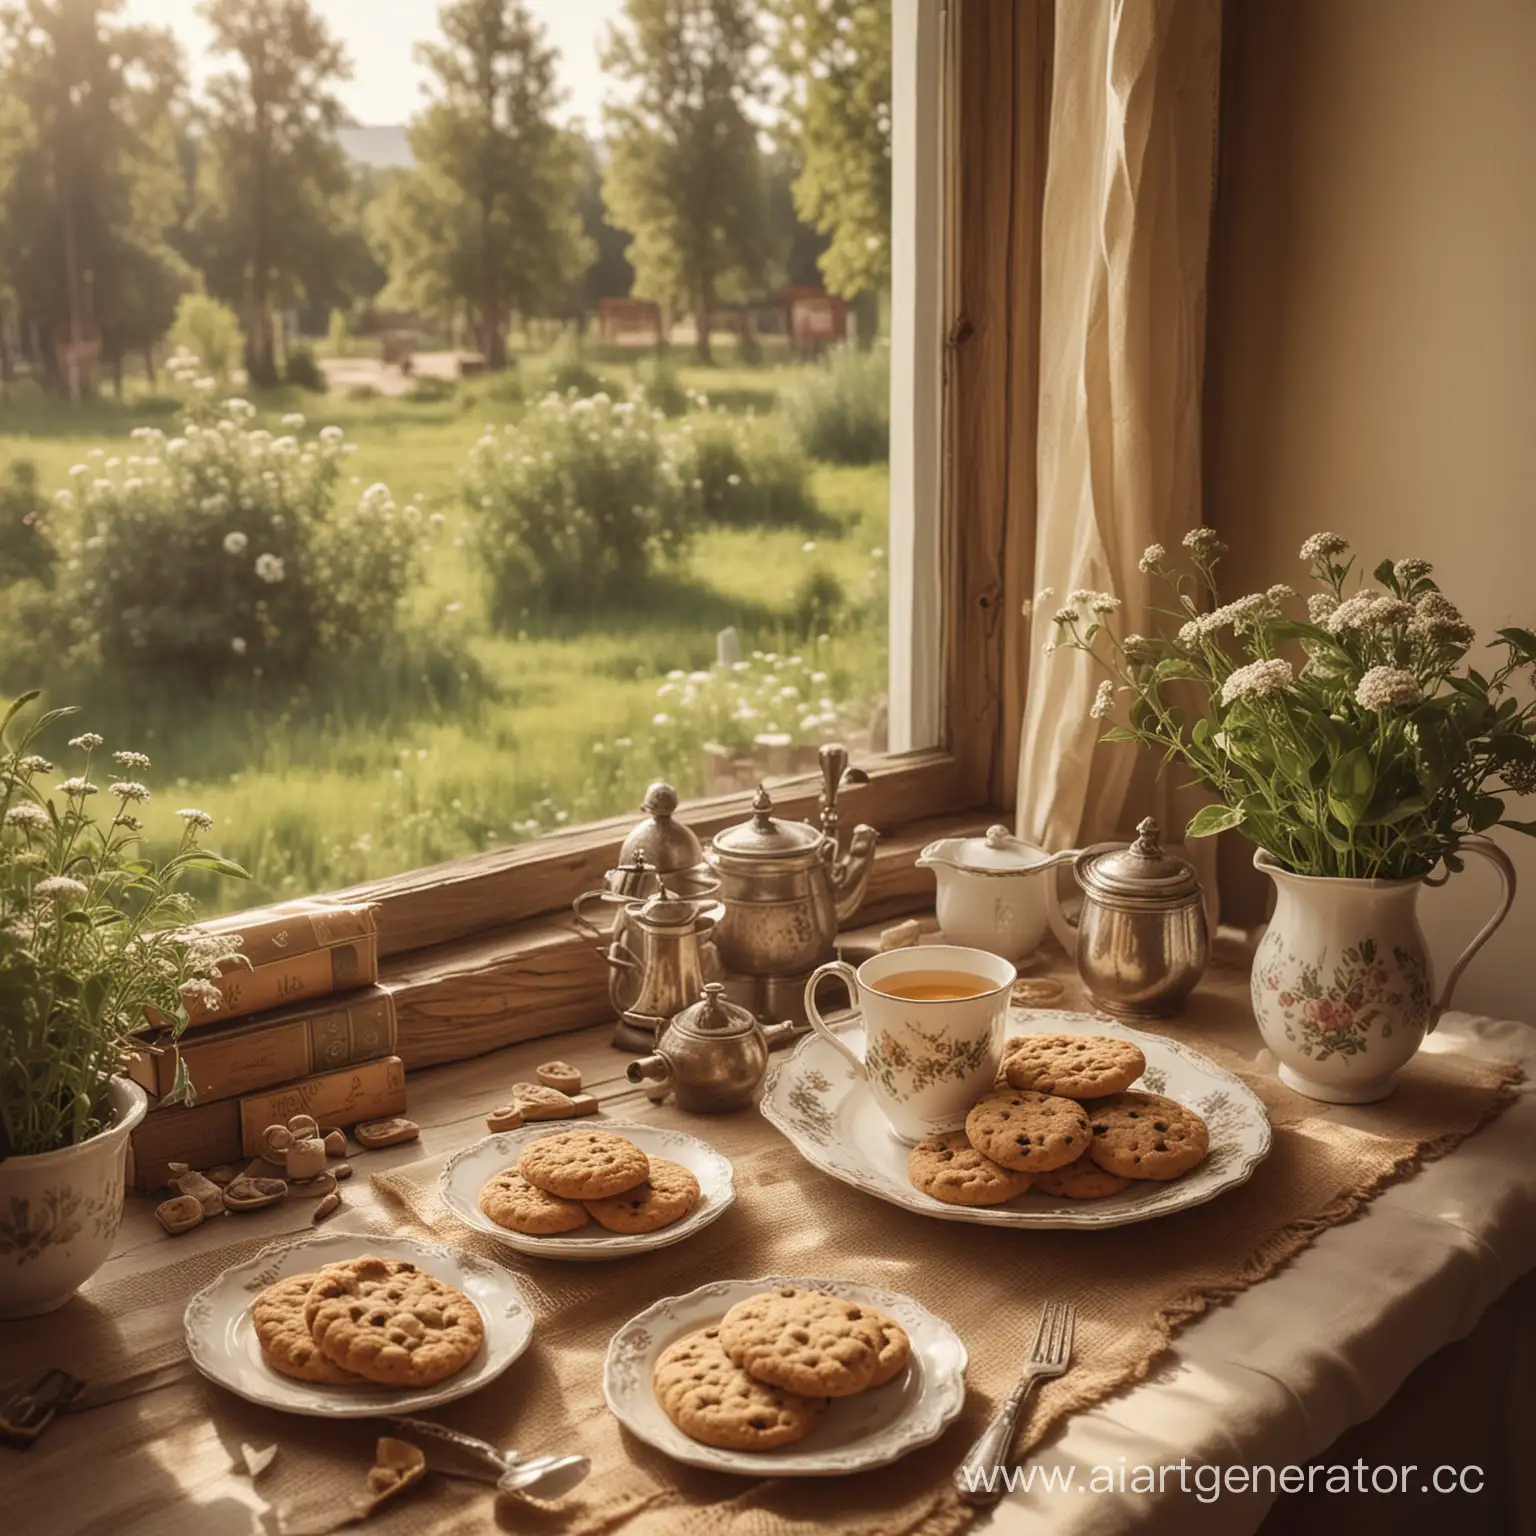 Suvorov-Glamping-Herbal-Tea-and-Cookies-Amidst-Rustic-Charm